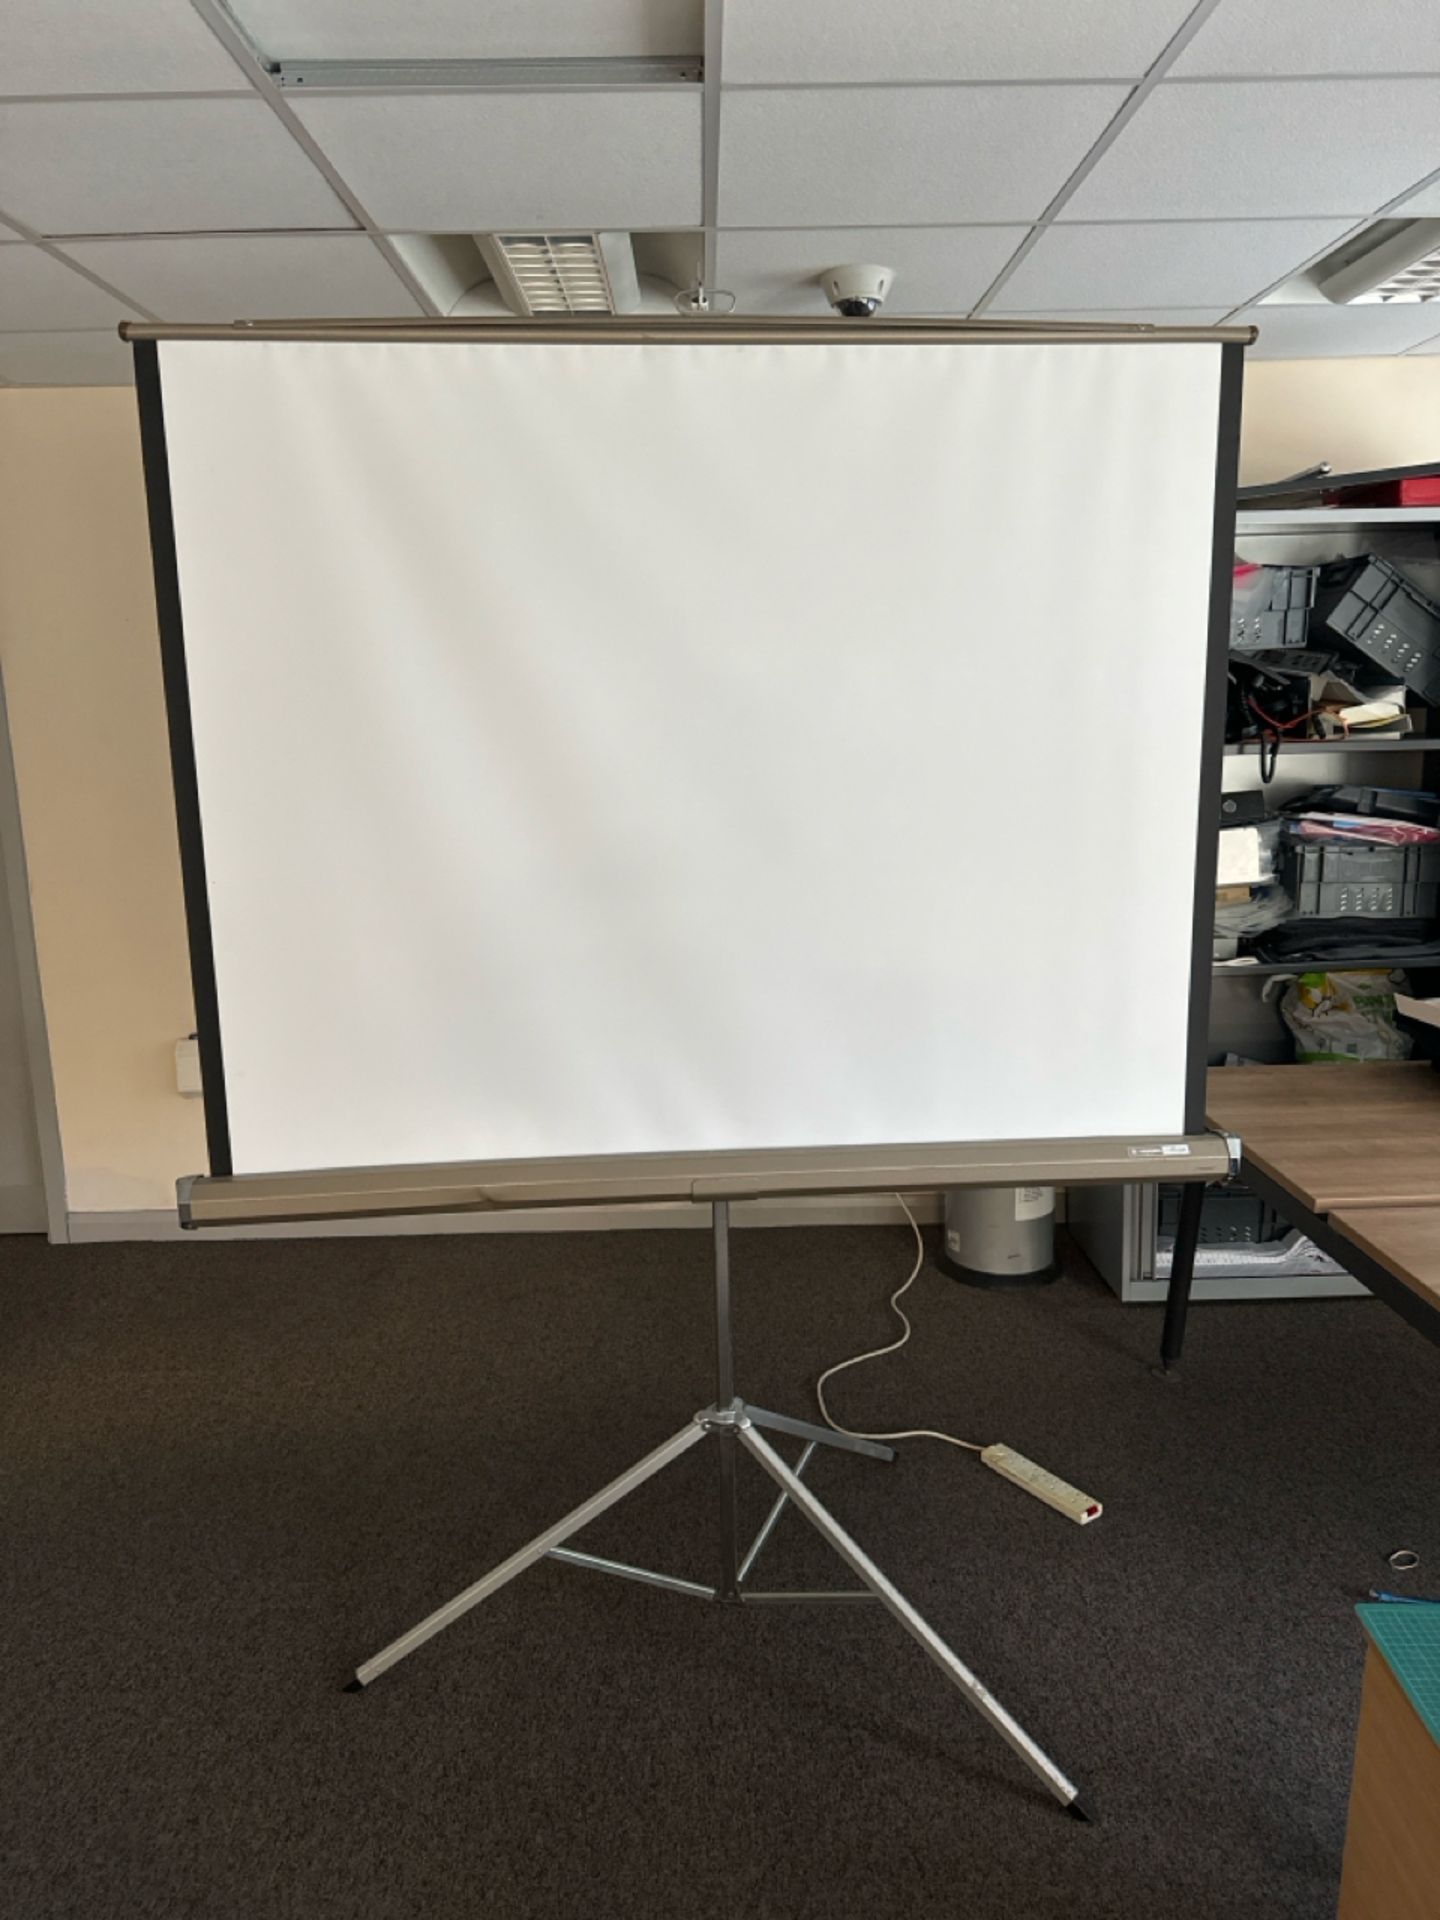 ref 180 - Harkness Miralyte Projector Screen & Stand - Image 2 of 6